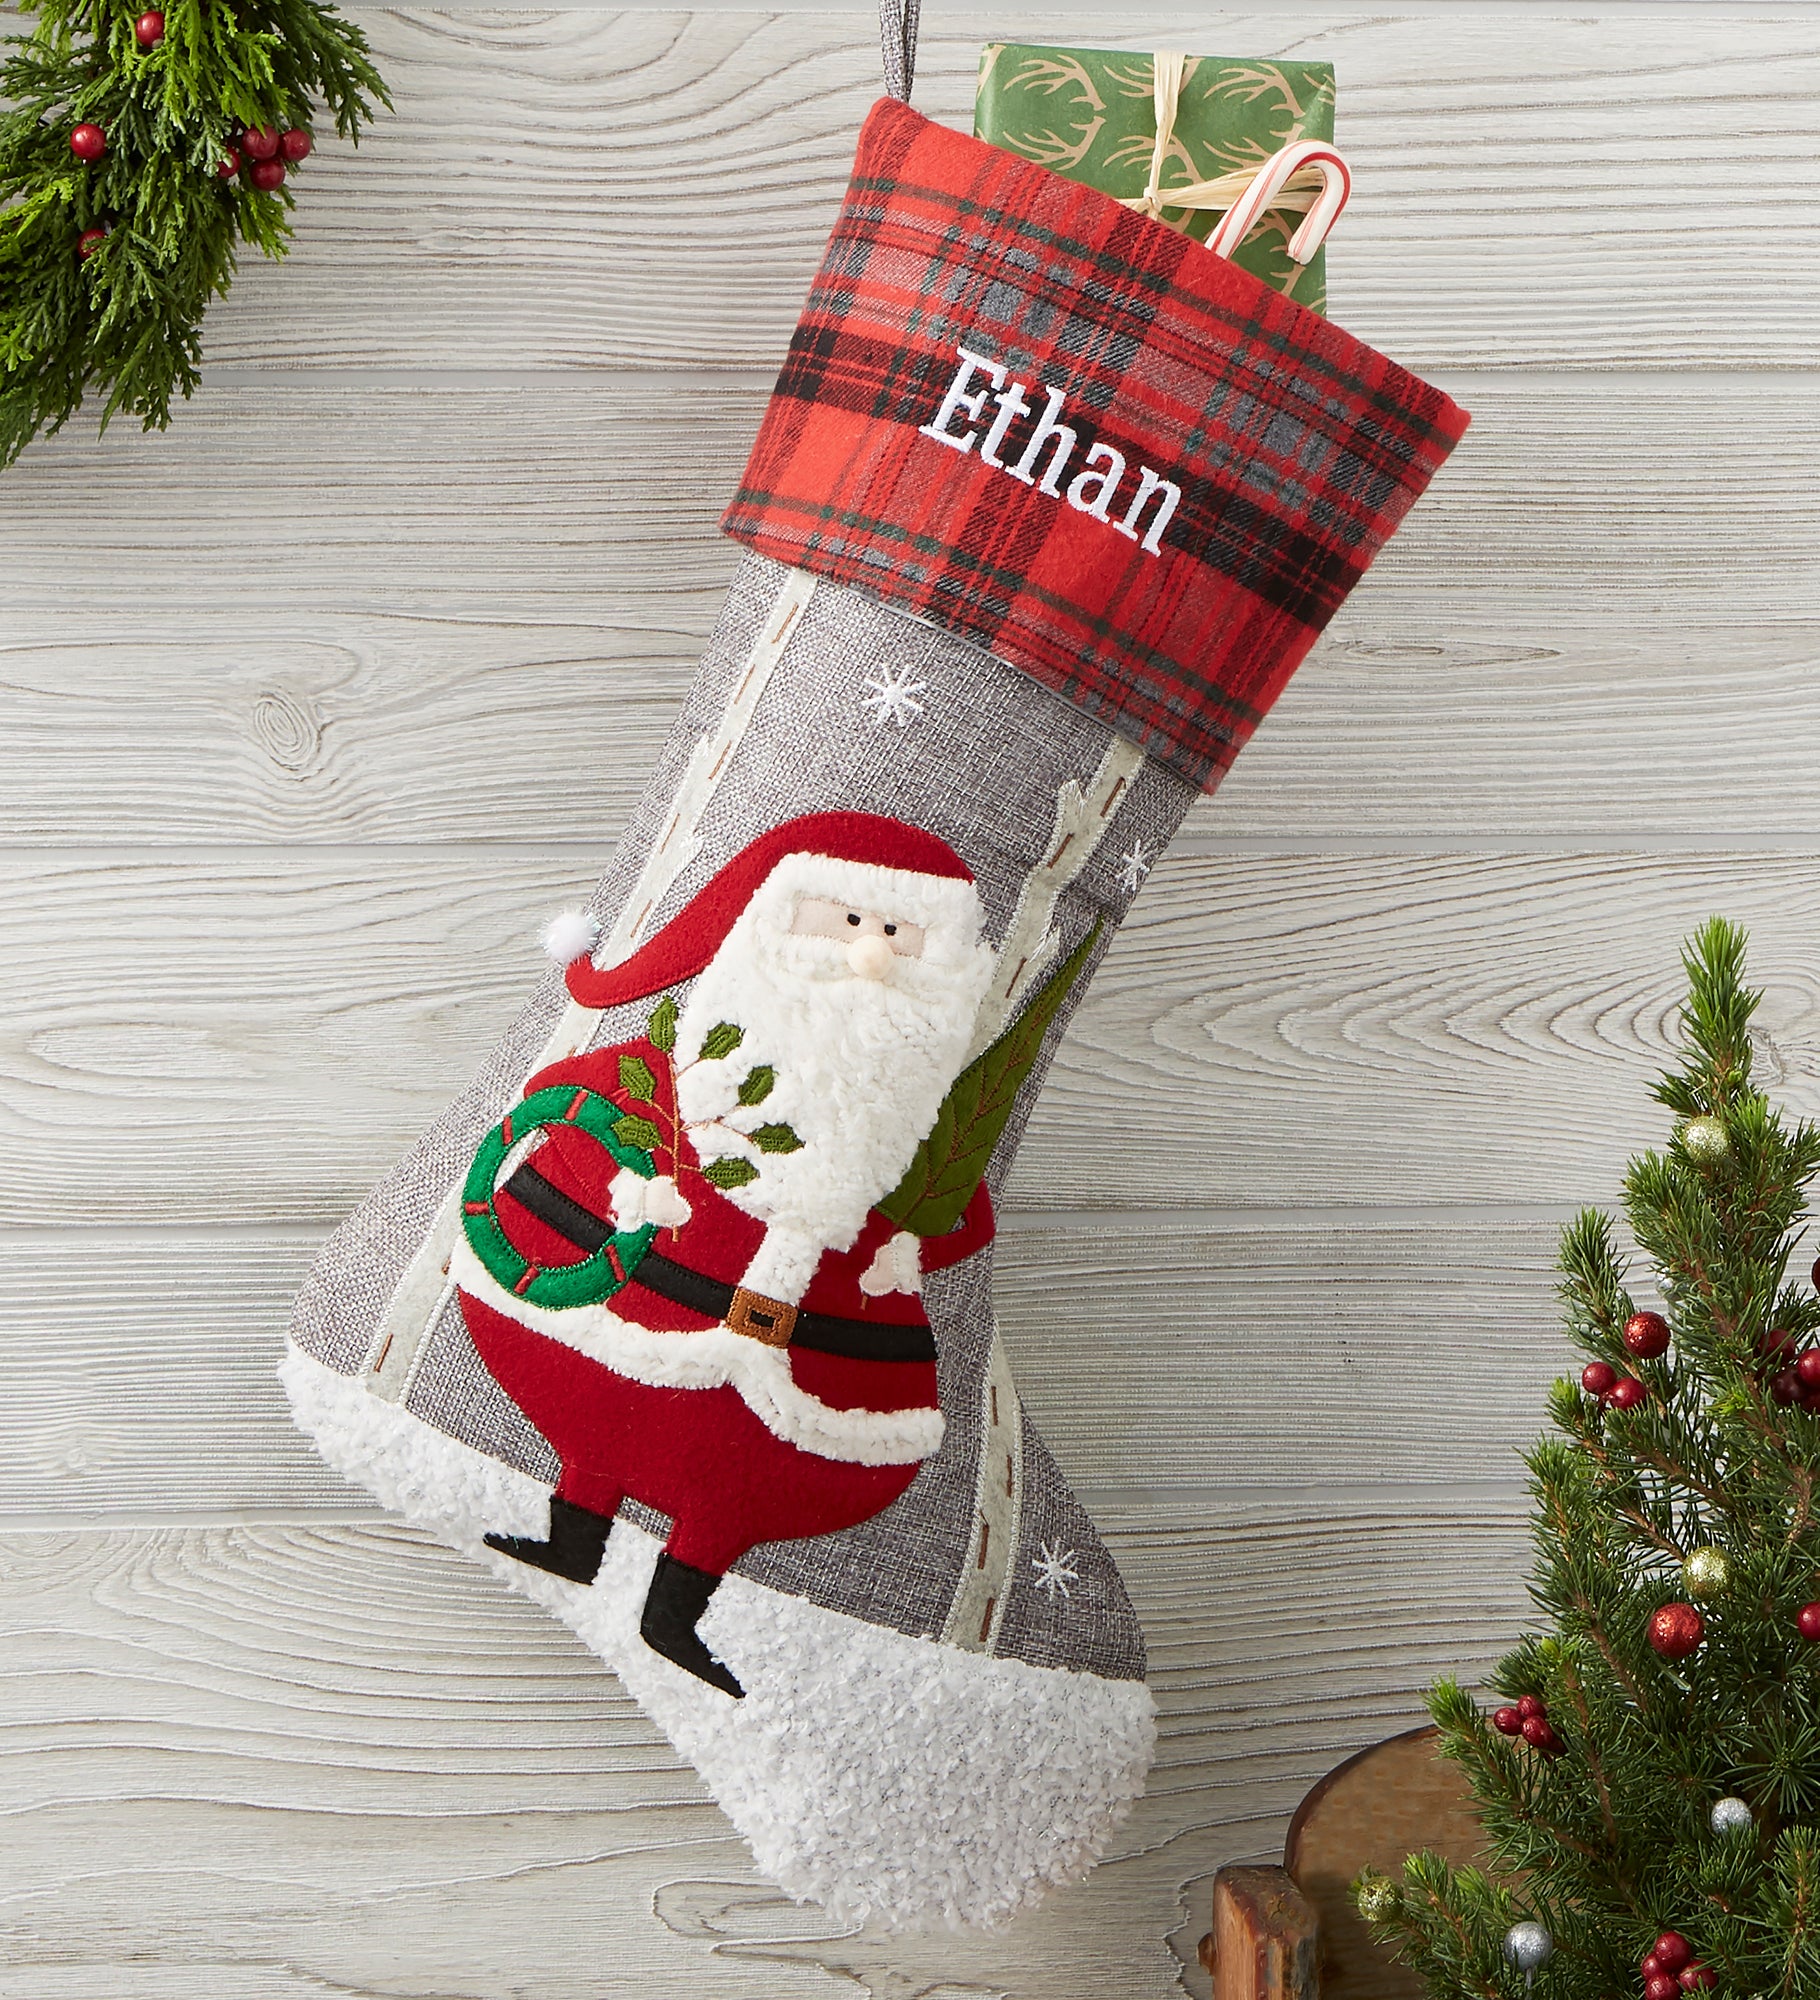 Wintry Cheer Personalized Christmas Stockings